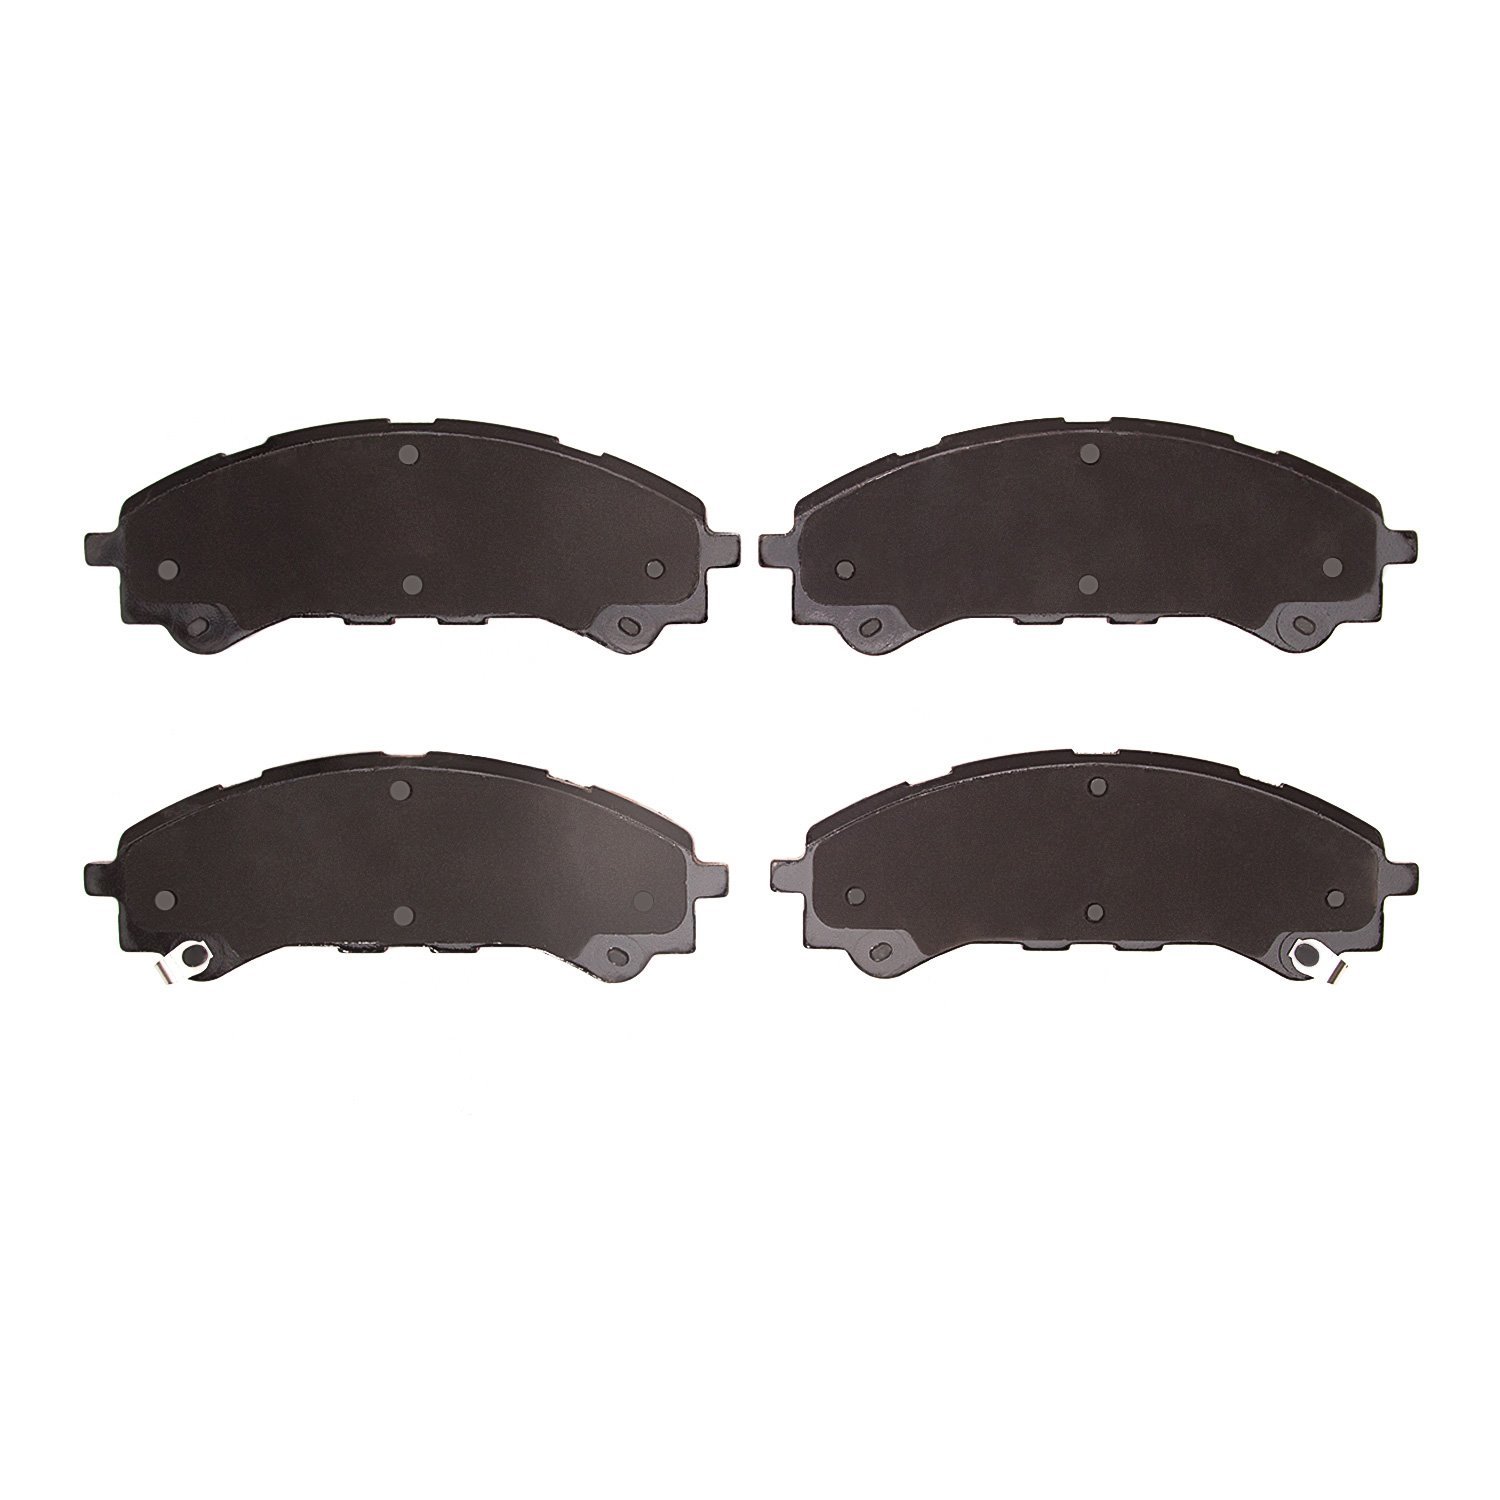 1551-2216-00 5000 Advanced Ceramic Brake Pads, Fits Select Ford/Lincoln/Mercury/Mazda, Position: Front